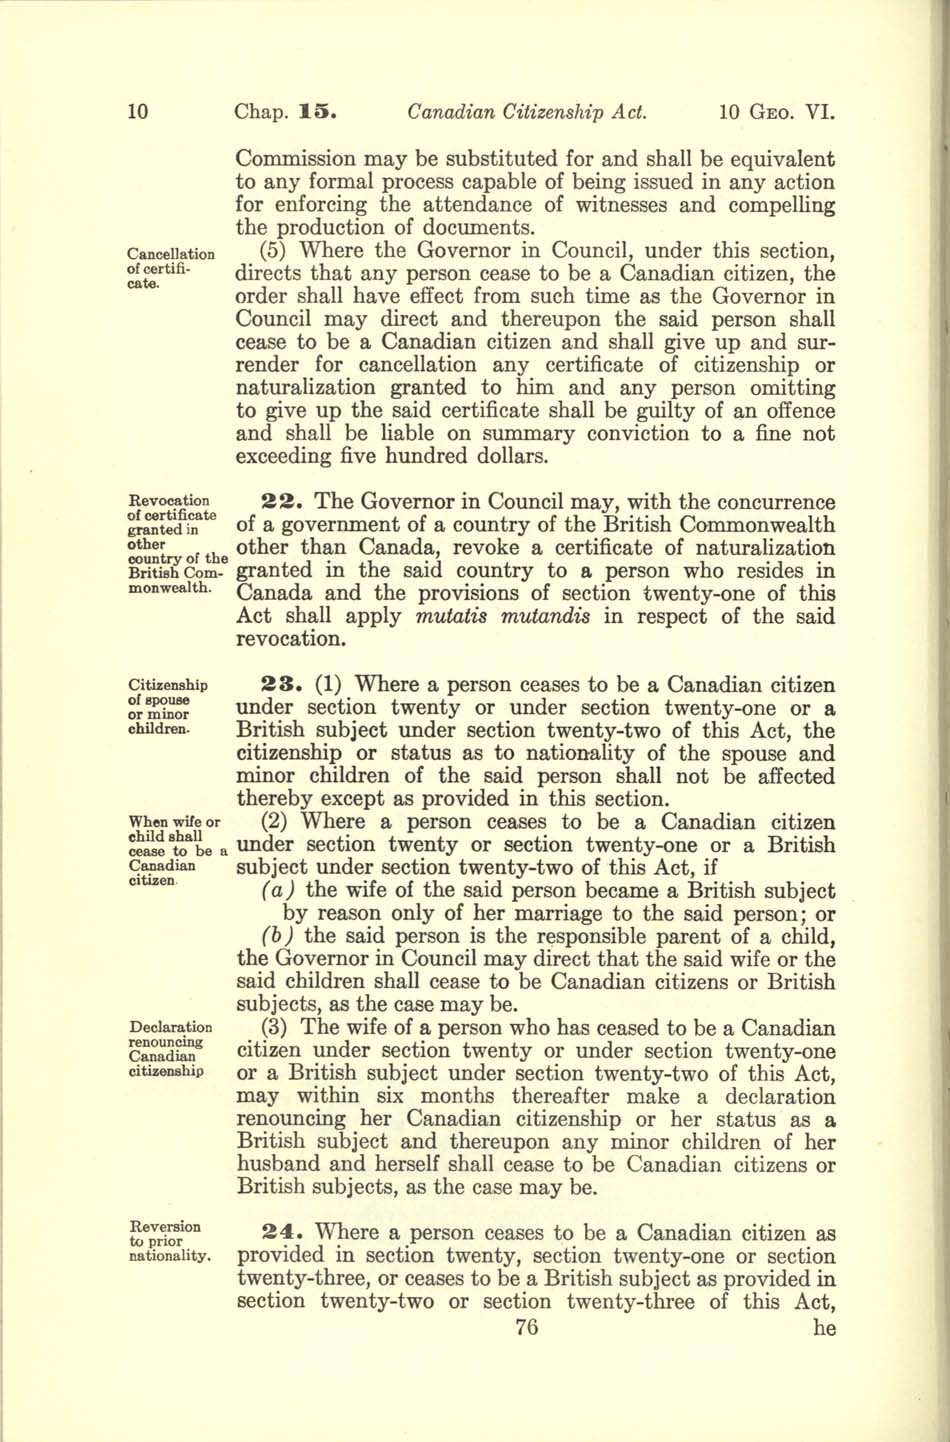 Chap 15 Page 76 Canadian Citizenship Act, 1947